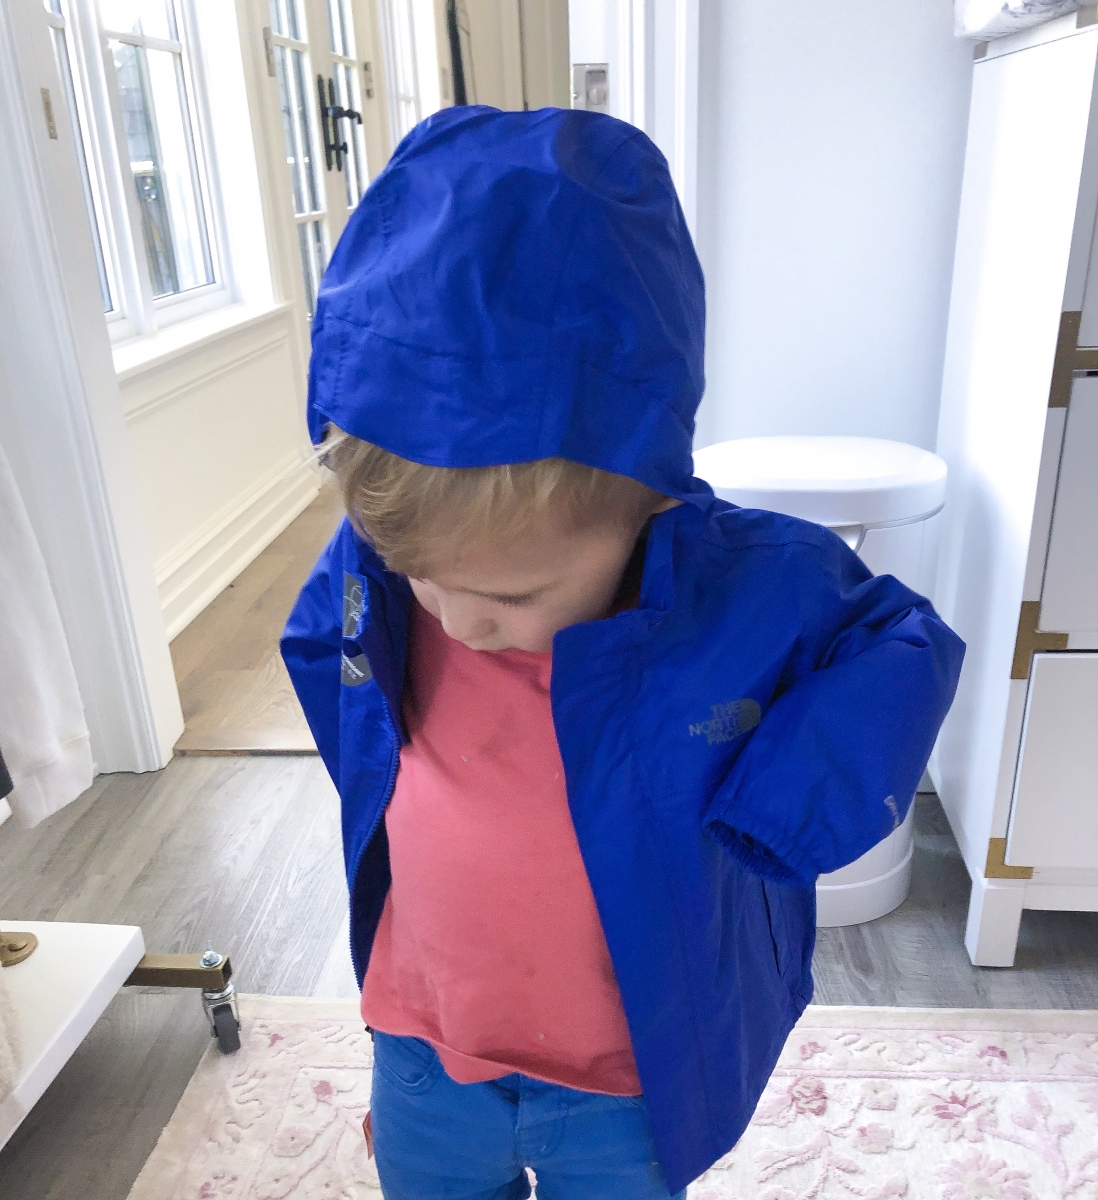 NSALE 2019 toddler Northface, Nordstrom Anniversary Sale 2019 baby items, emily gemma